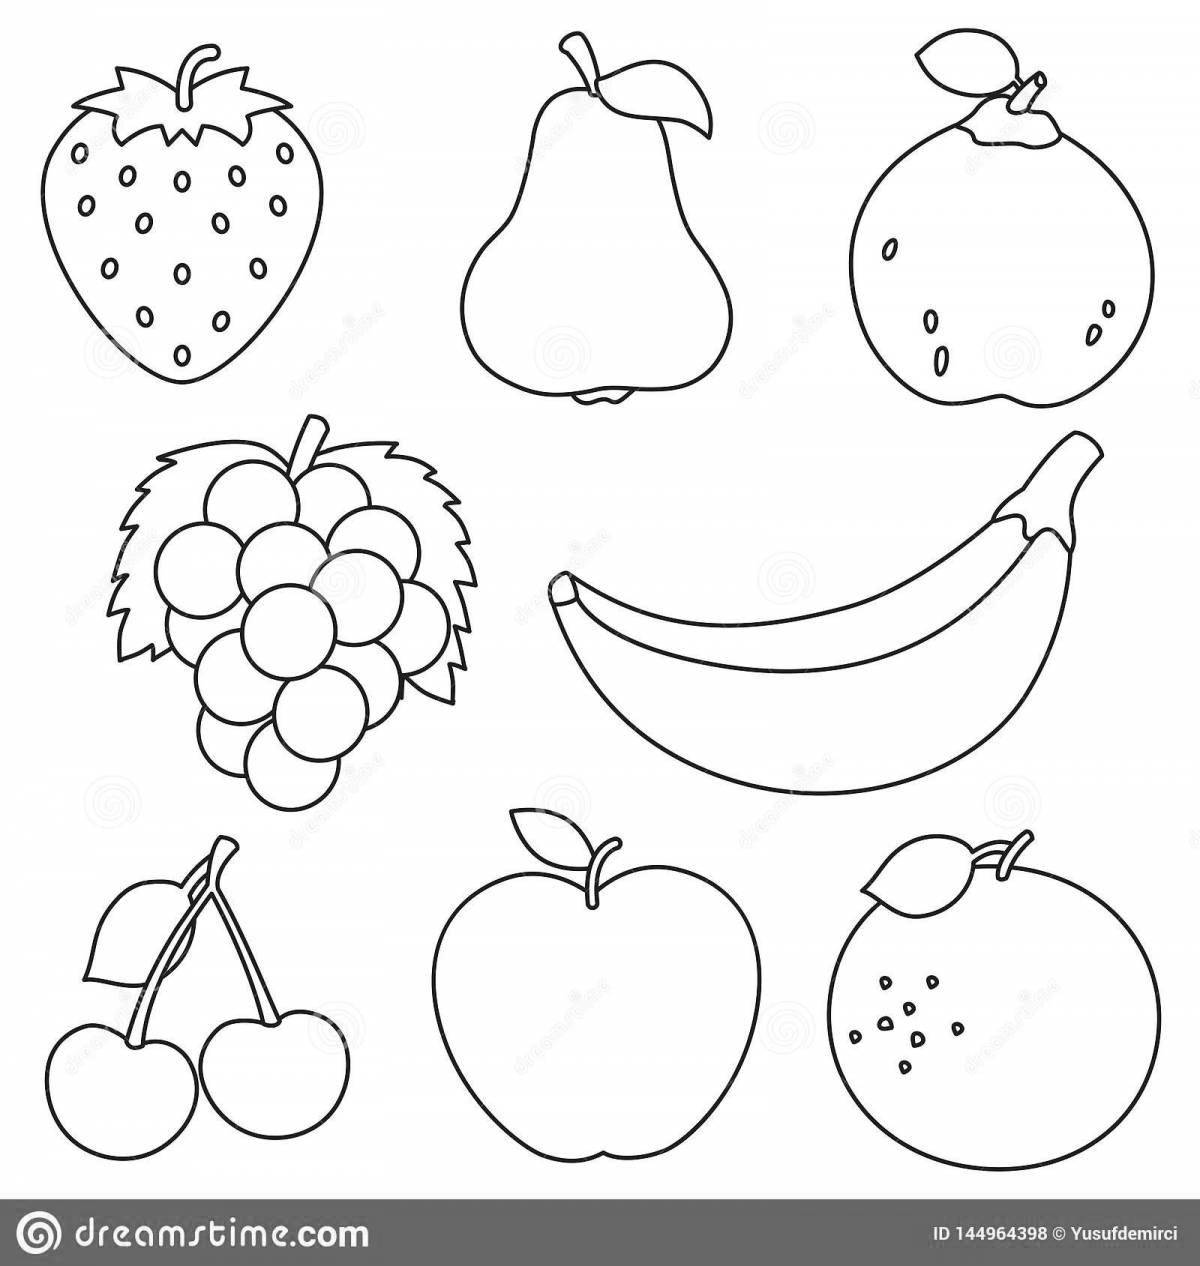 Playful fruit coloring page for 4-5 year olds